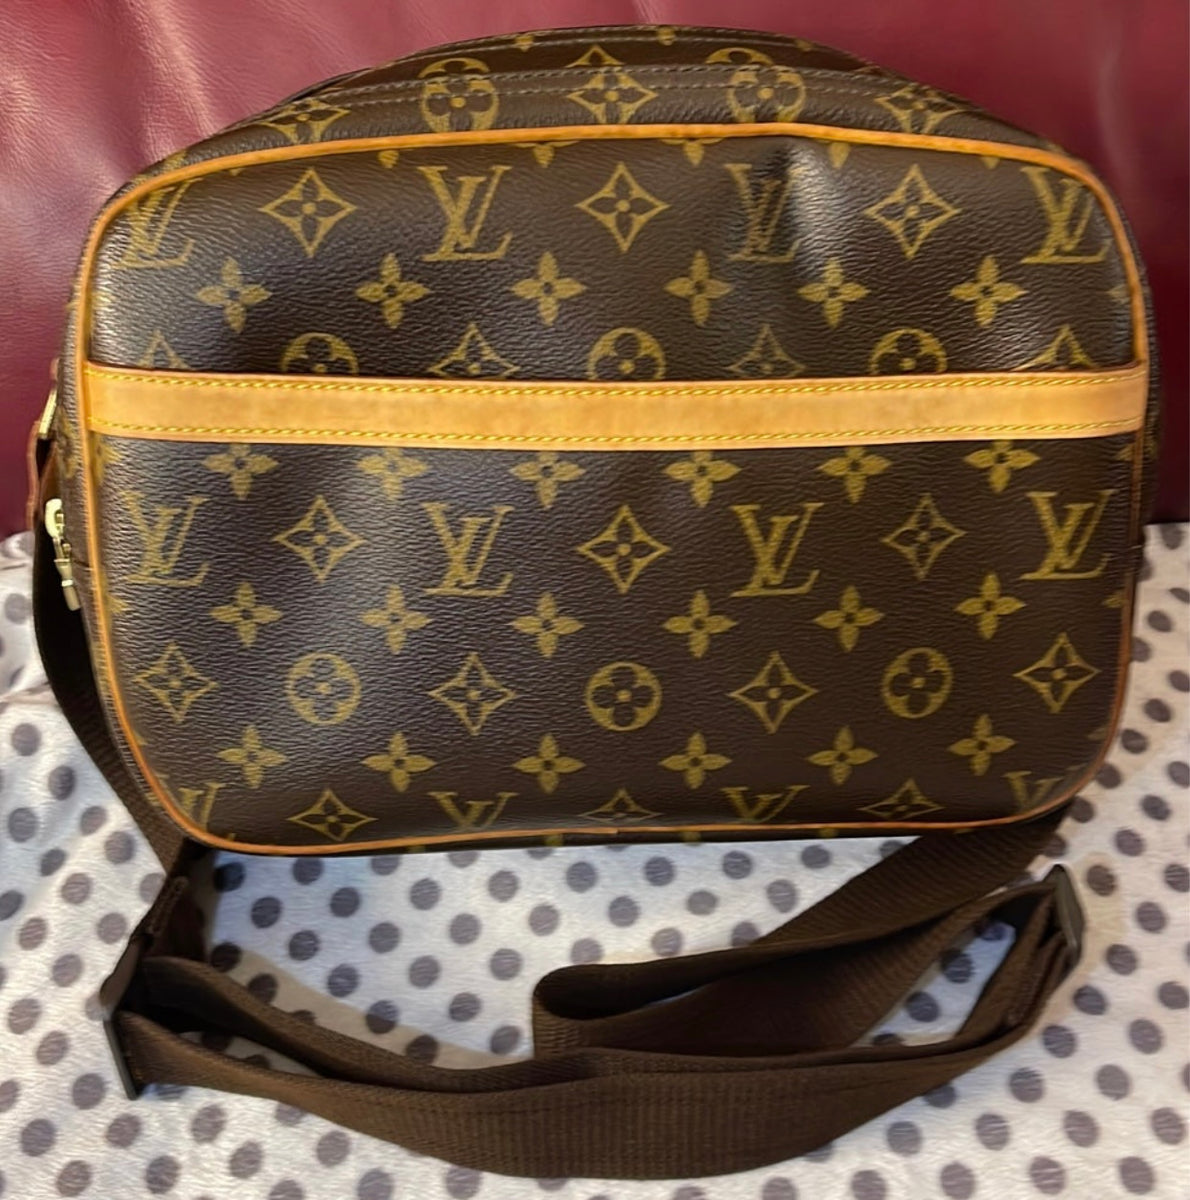 Louis Vuitton - Authenticated Reporter Handbag - Leather Brown for Women, Very Good Condition